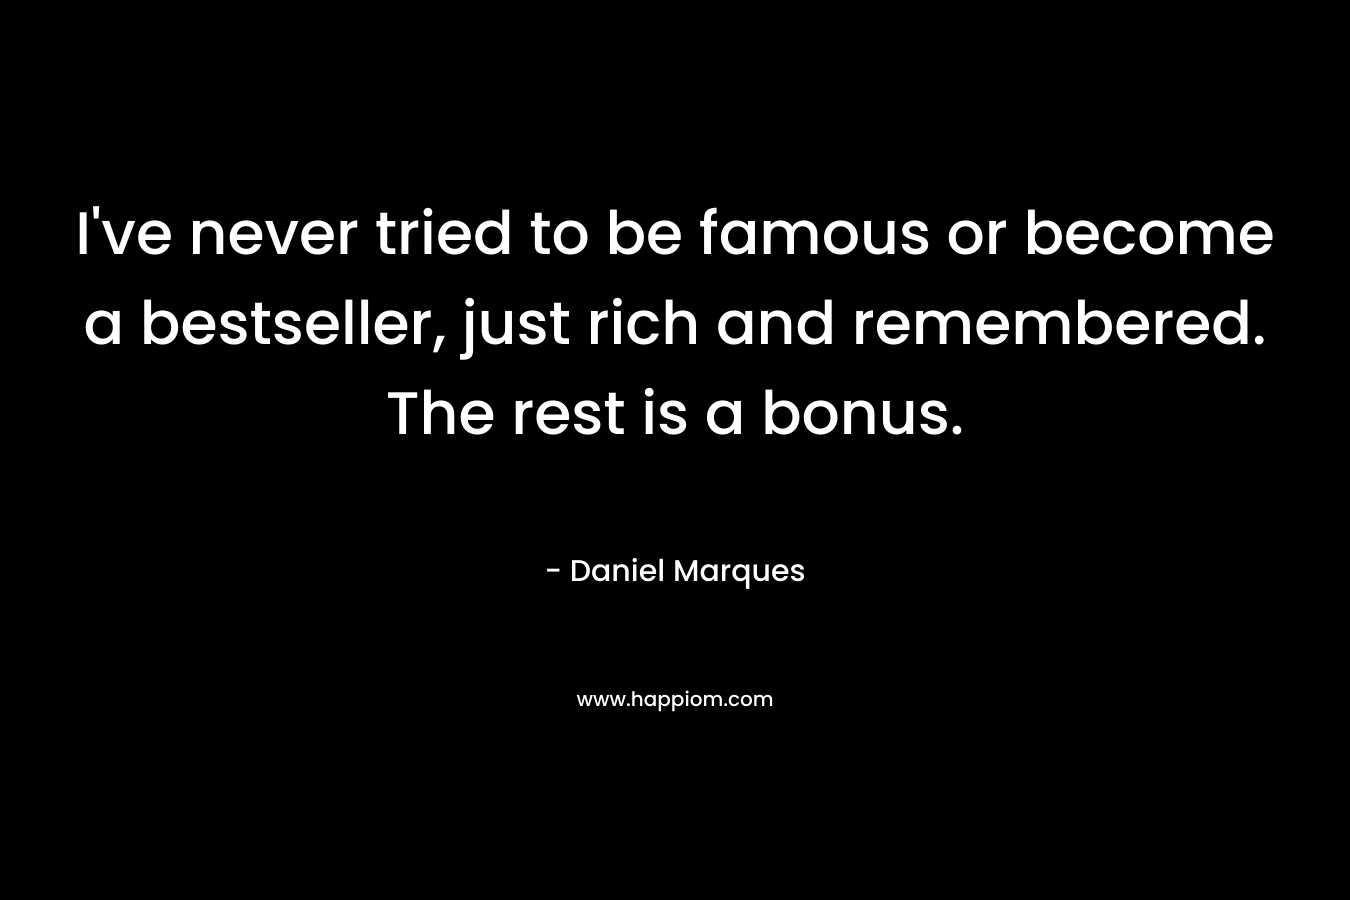 I've never tried to be famous or become a bestseller, just rich and remembered. The rest is a bonus.